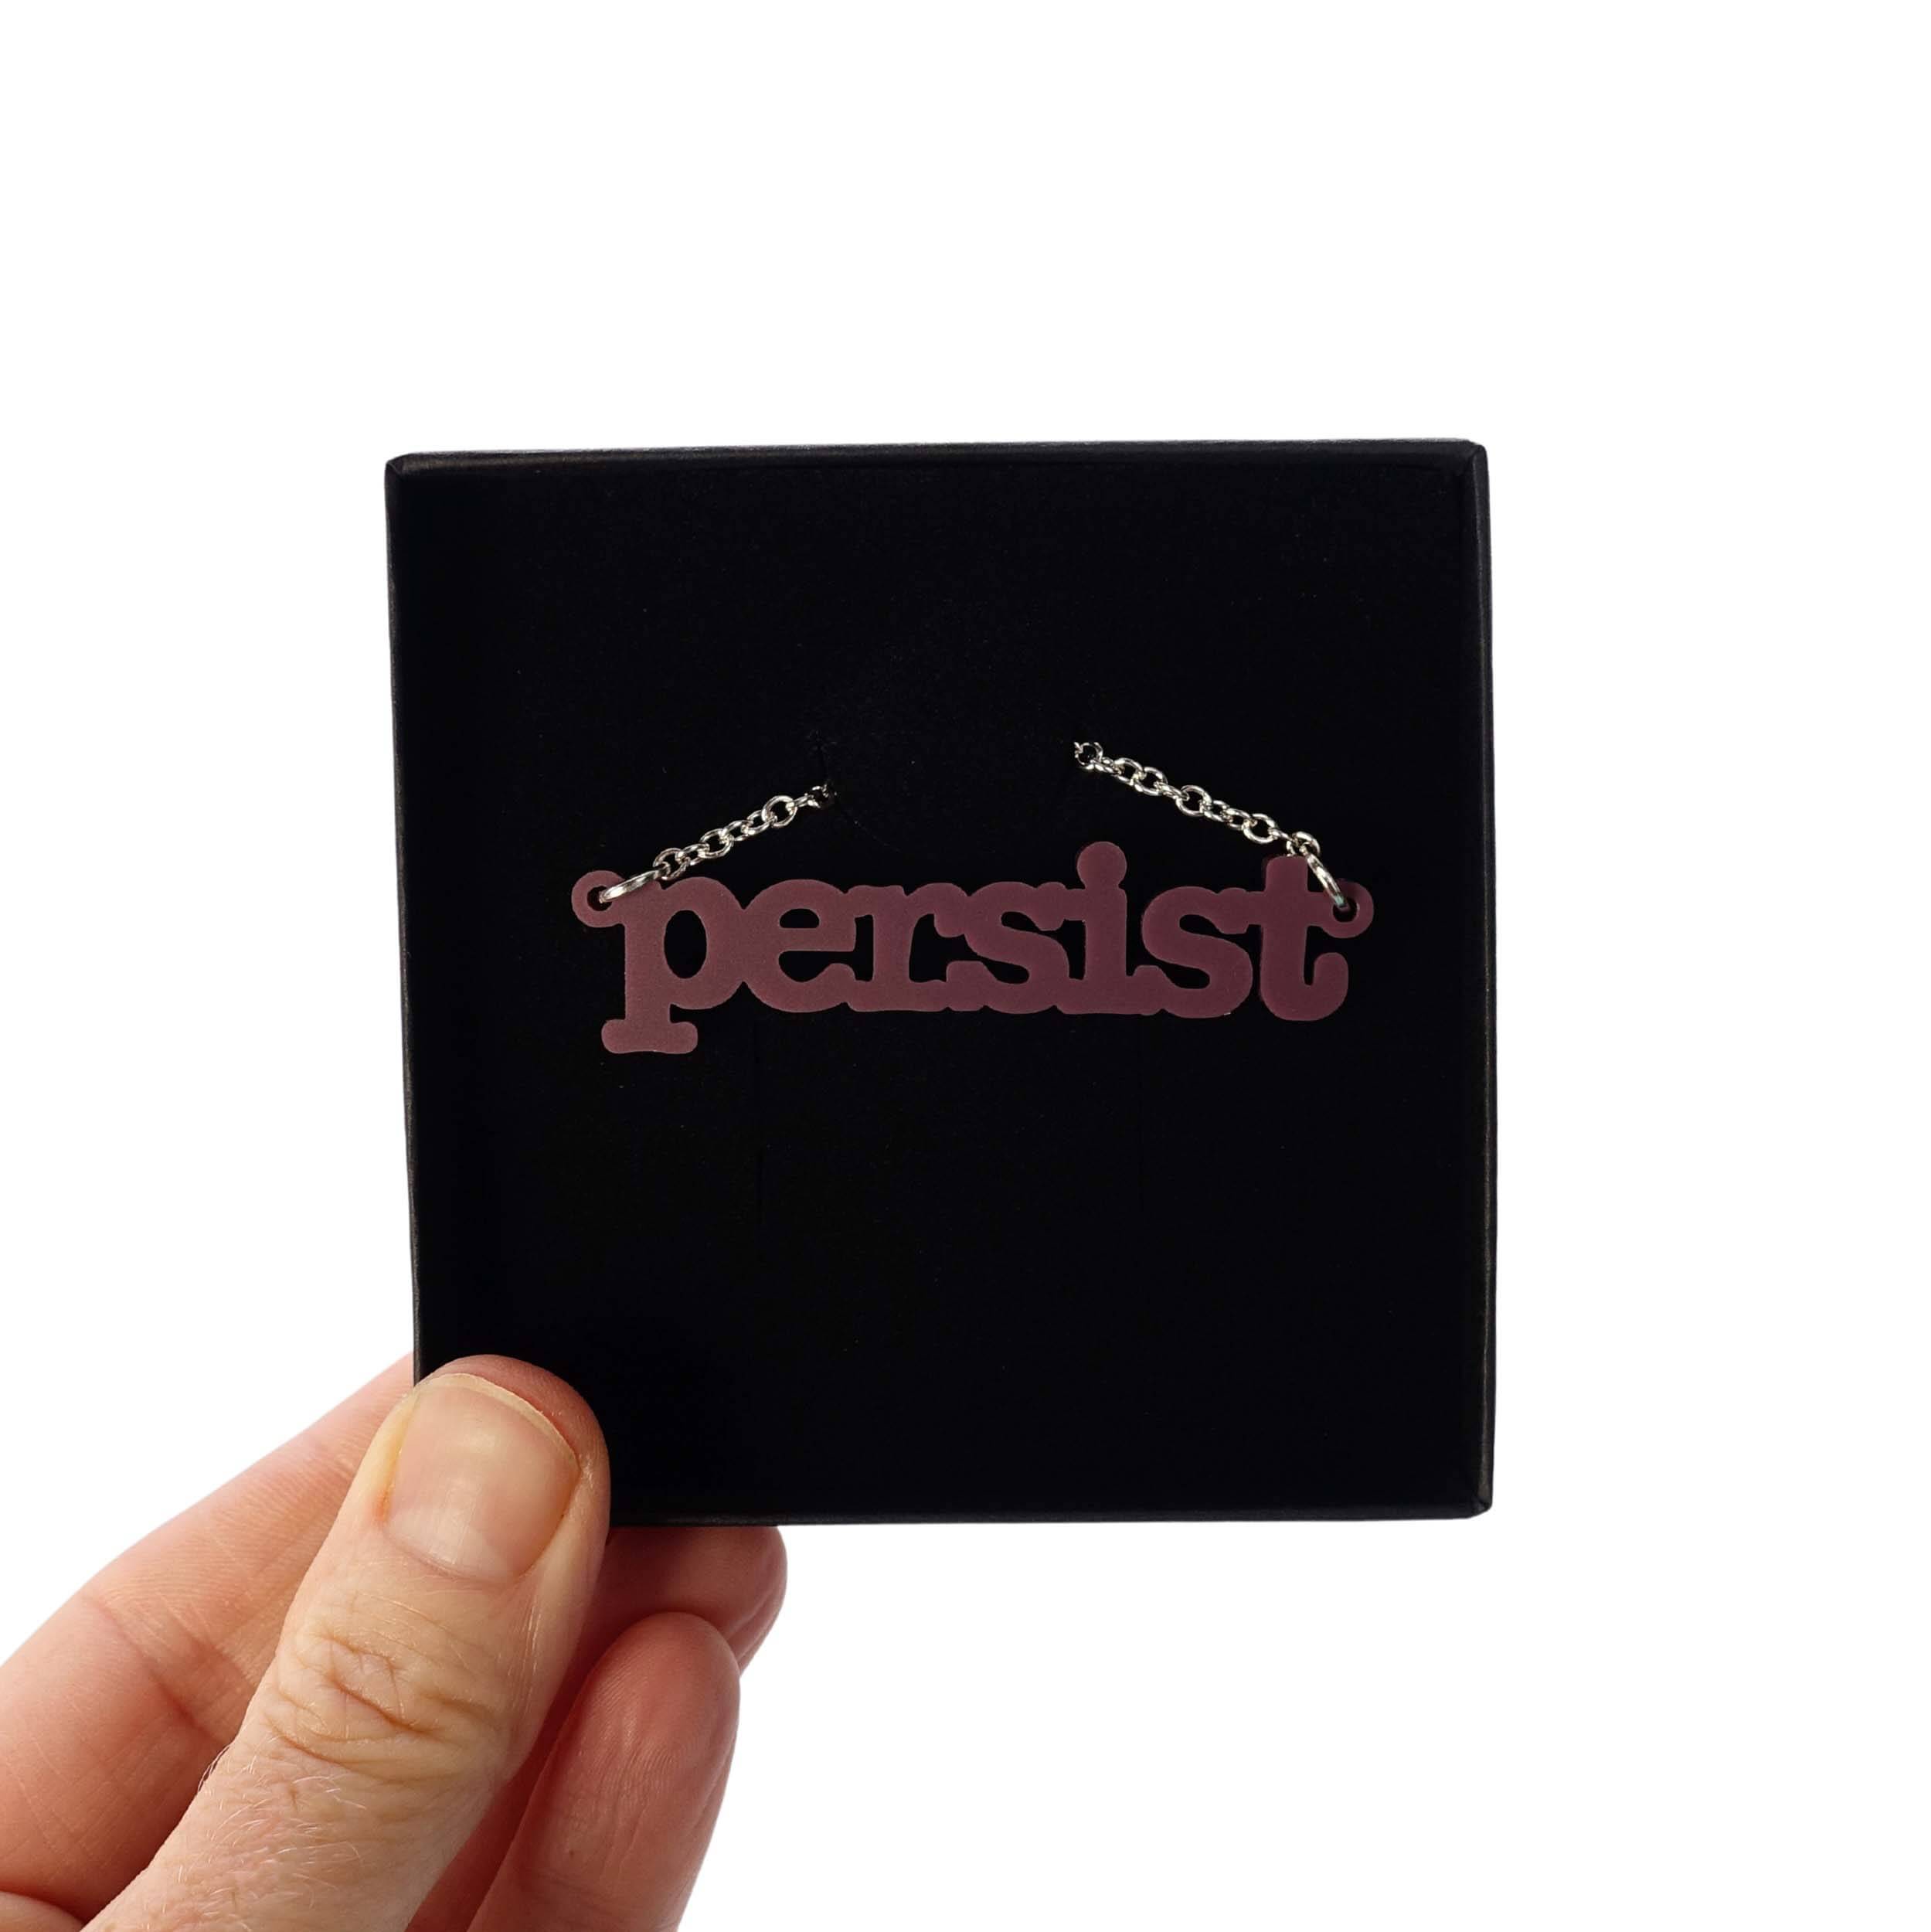 Cassis Persist necklace shown in a Wear and Resist gift box. 